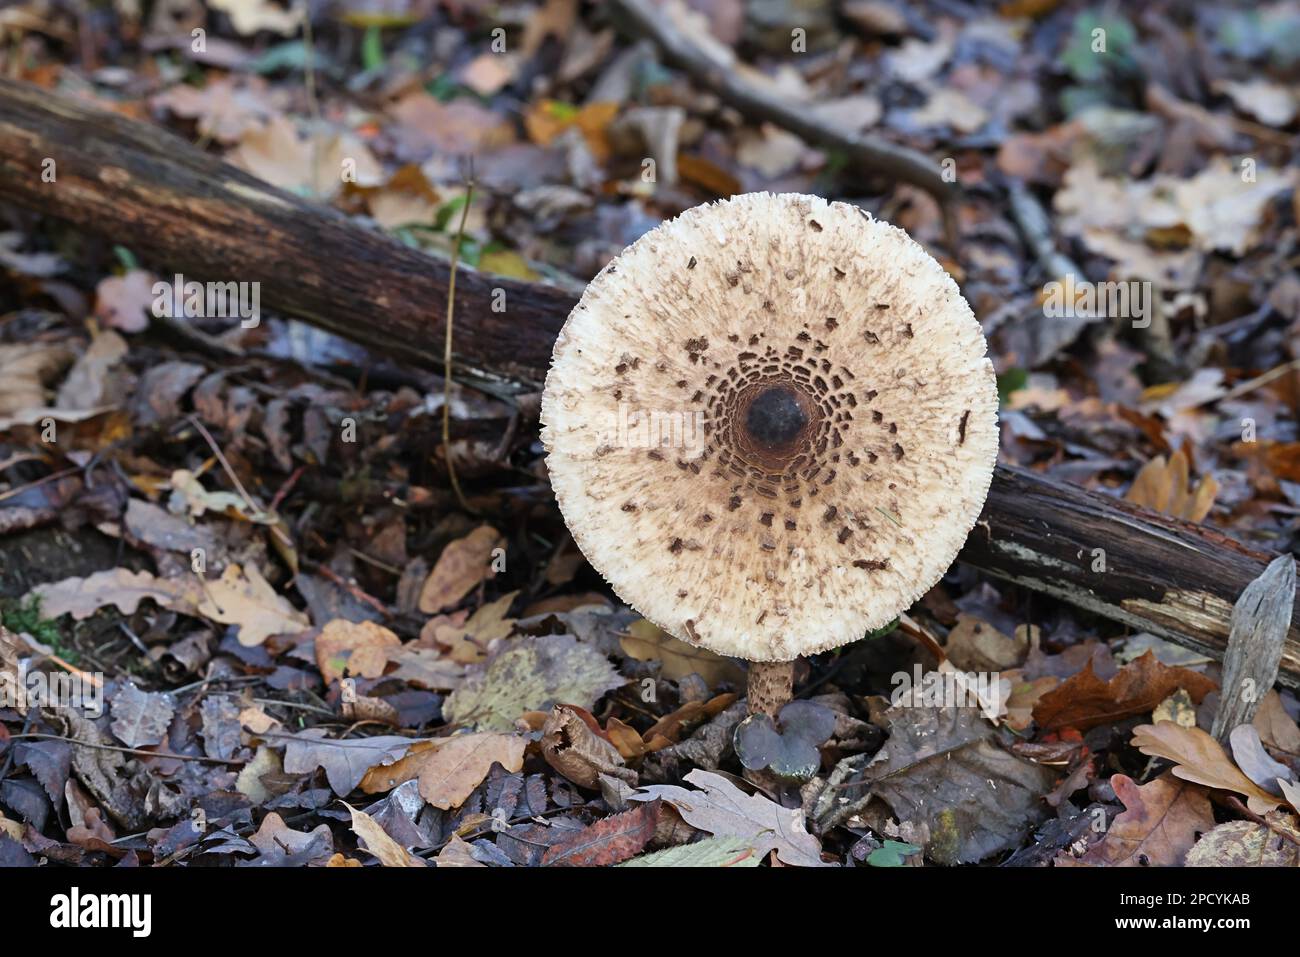 Macrolepiota procera, commonly known as the parasol mushroom, wild fungus from Finland Stock Photo